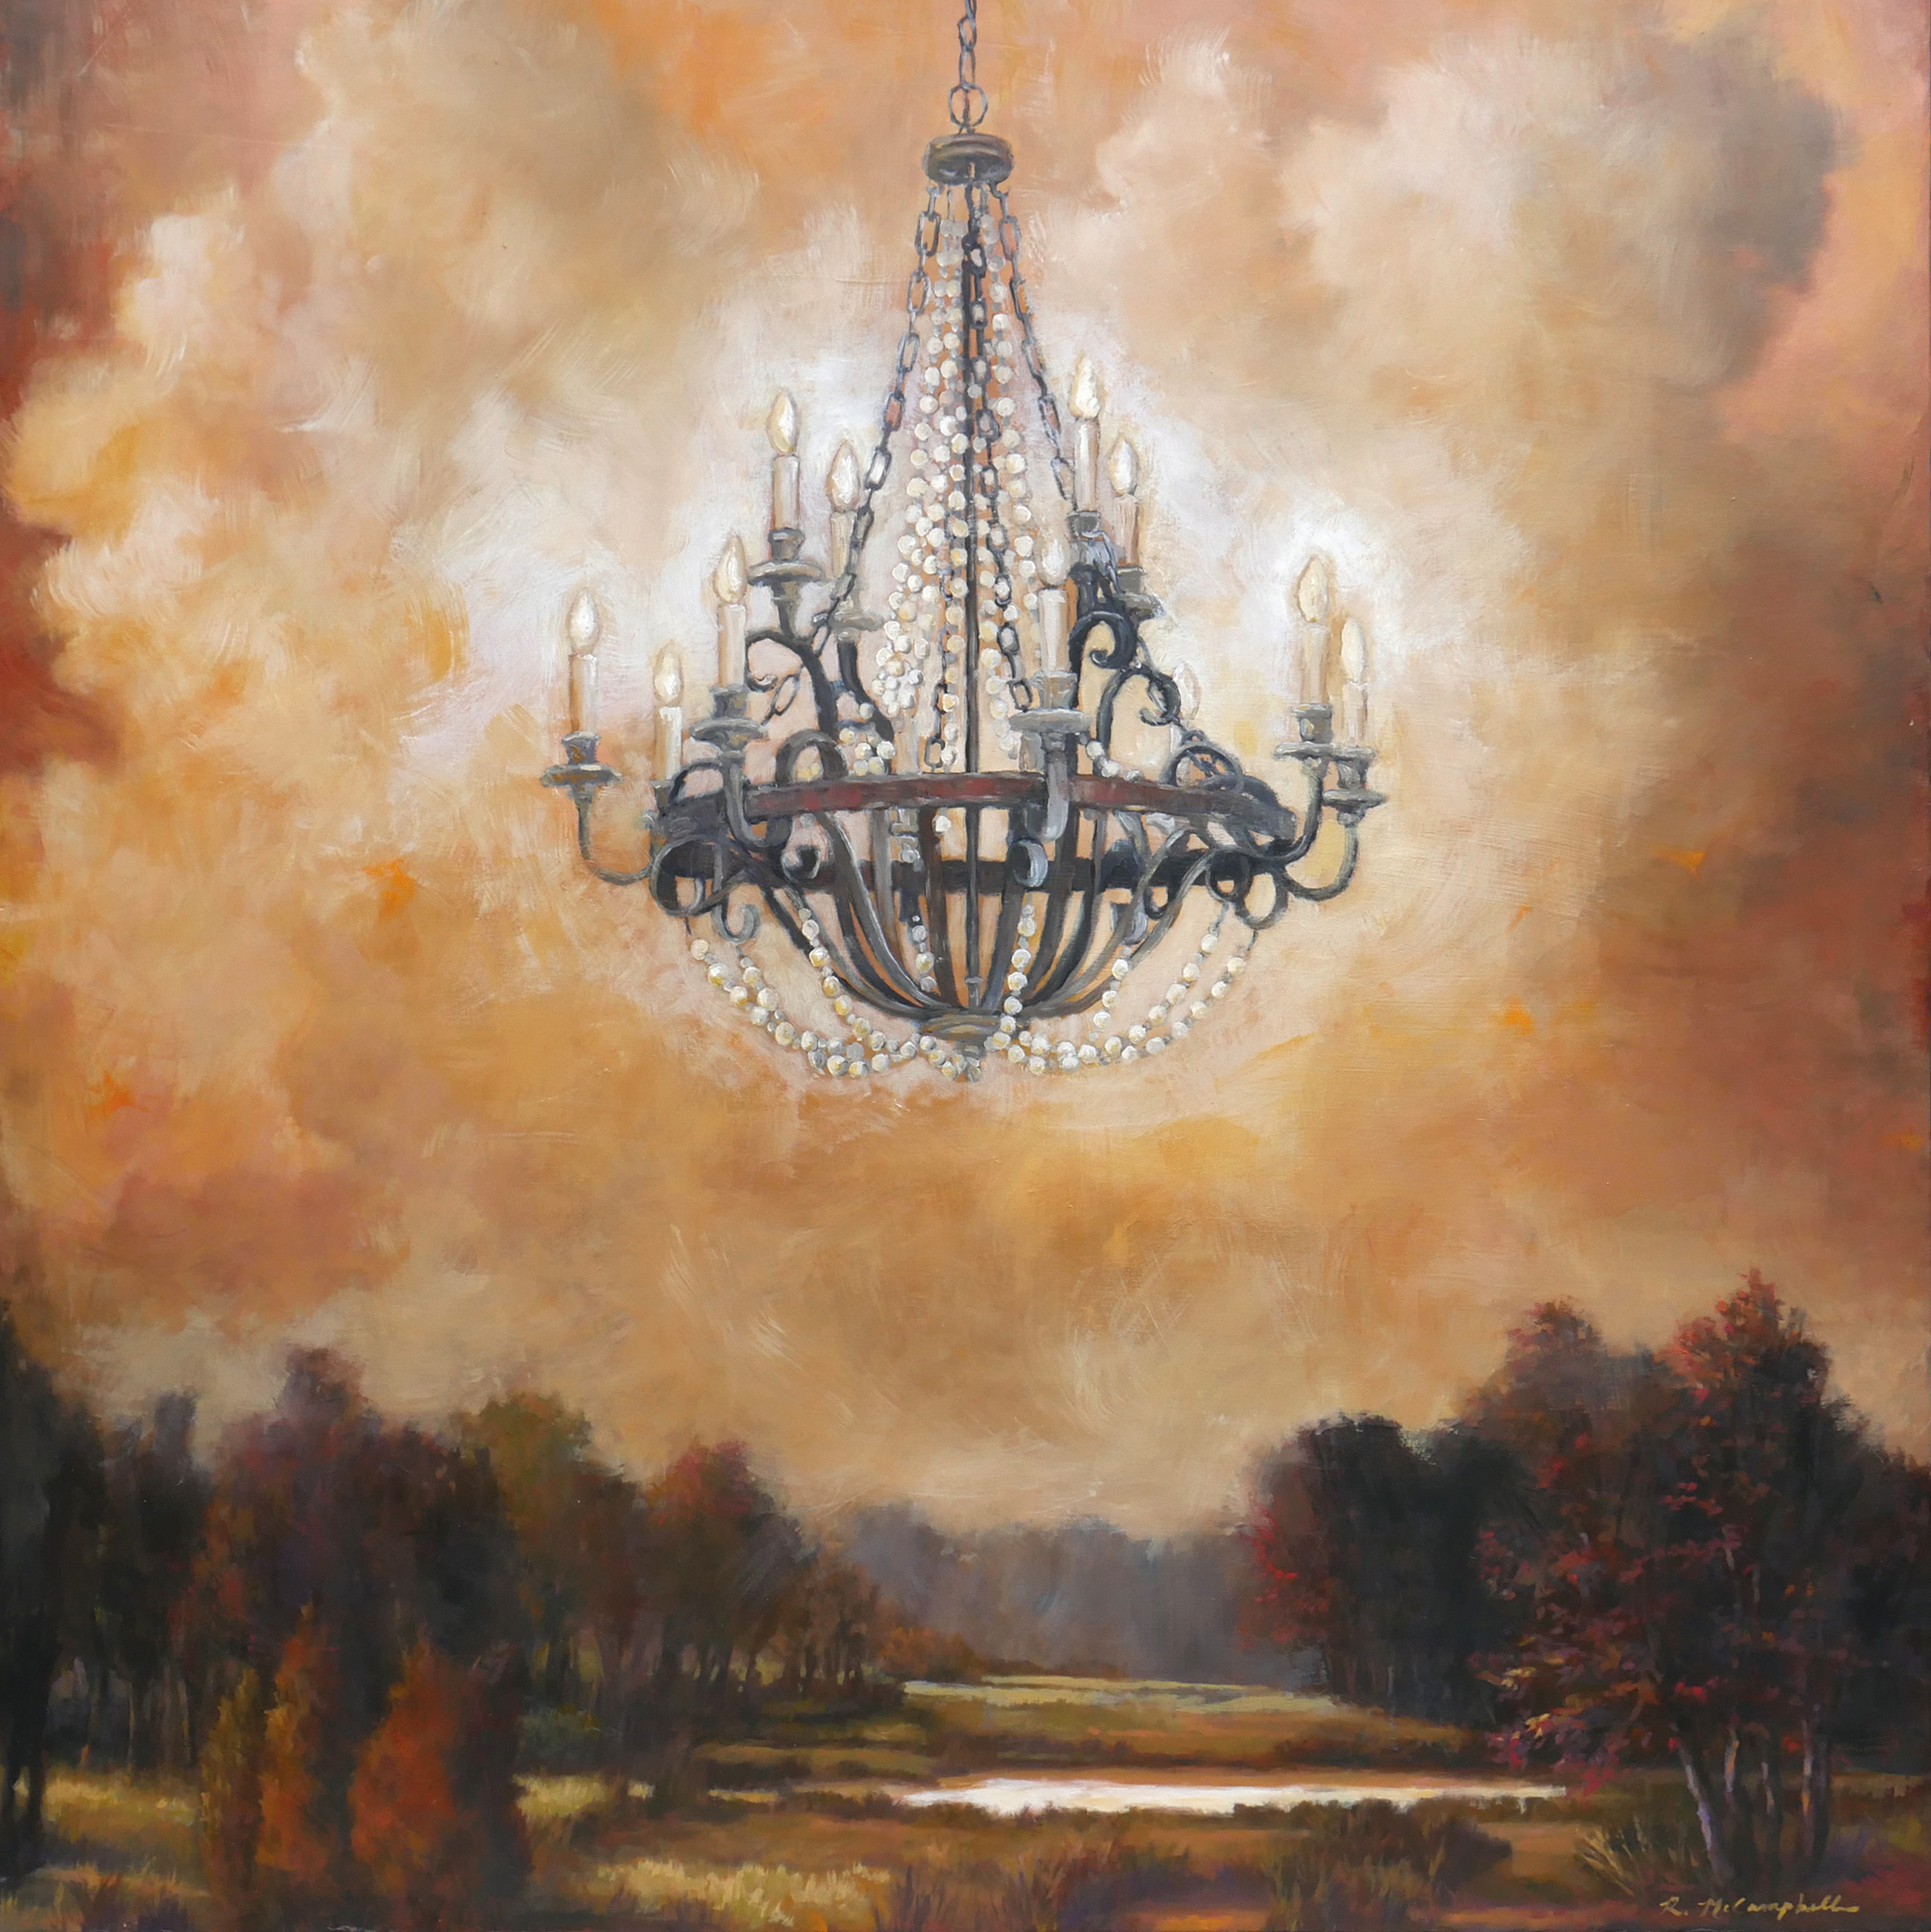 This is a landscape painting with primarily warm tones of fields and distant water with a moody sky and a huge chandelier hanging from the sky. 